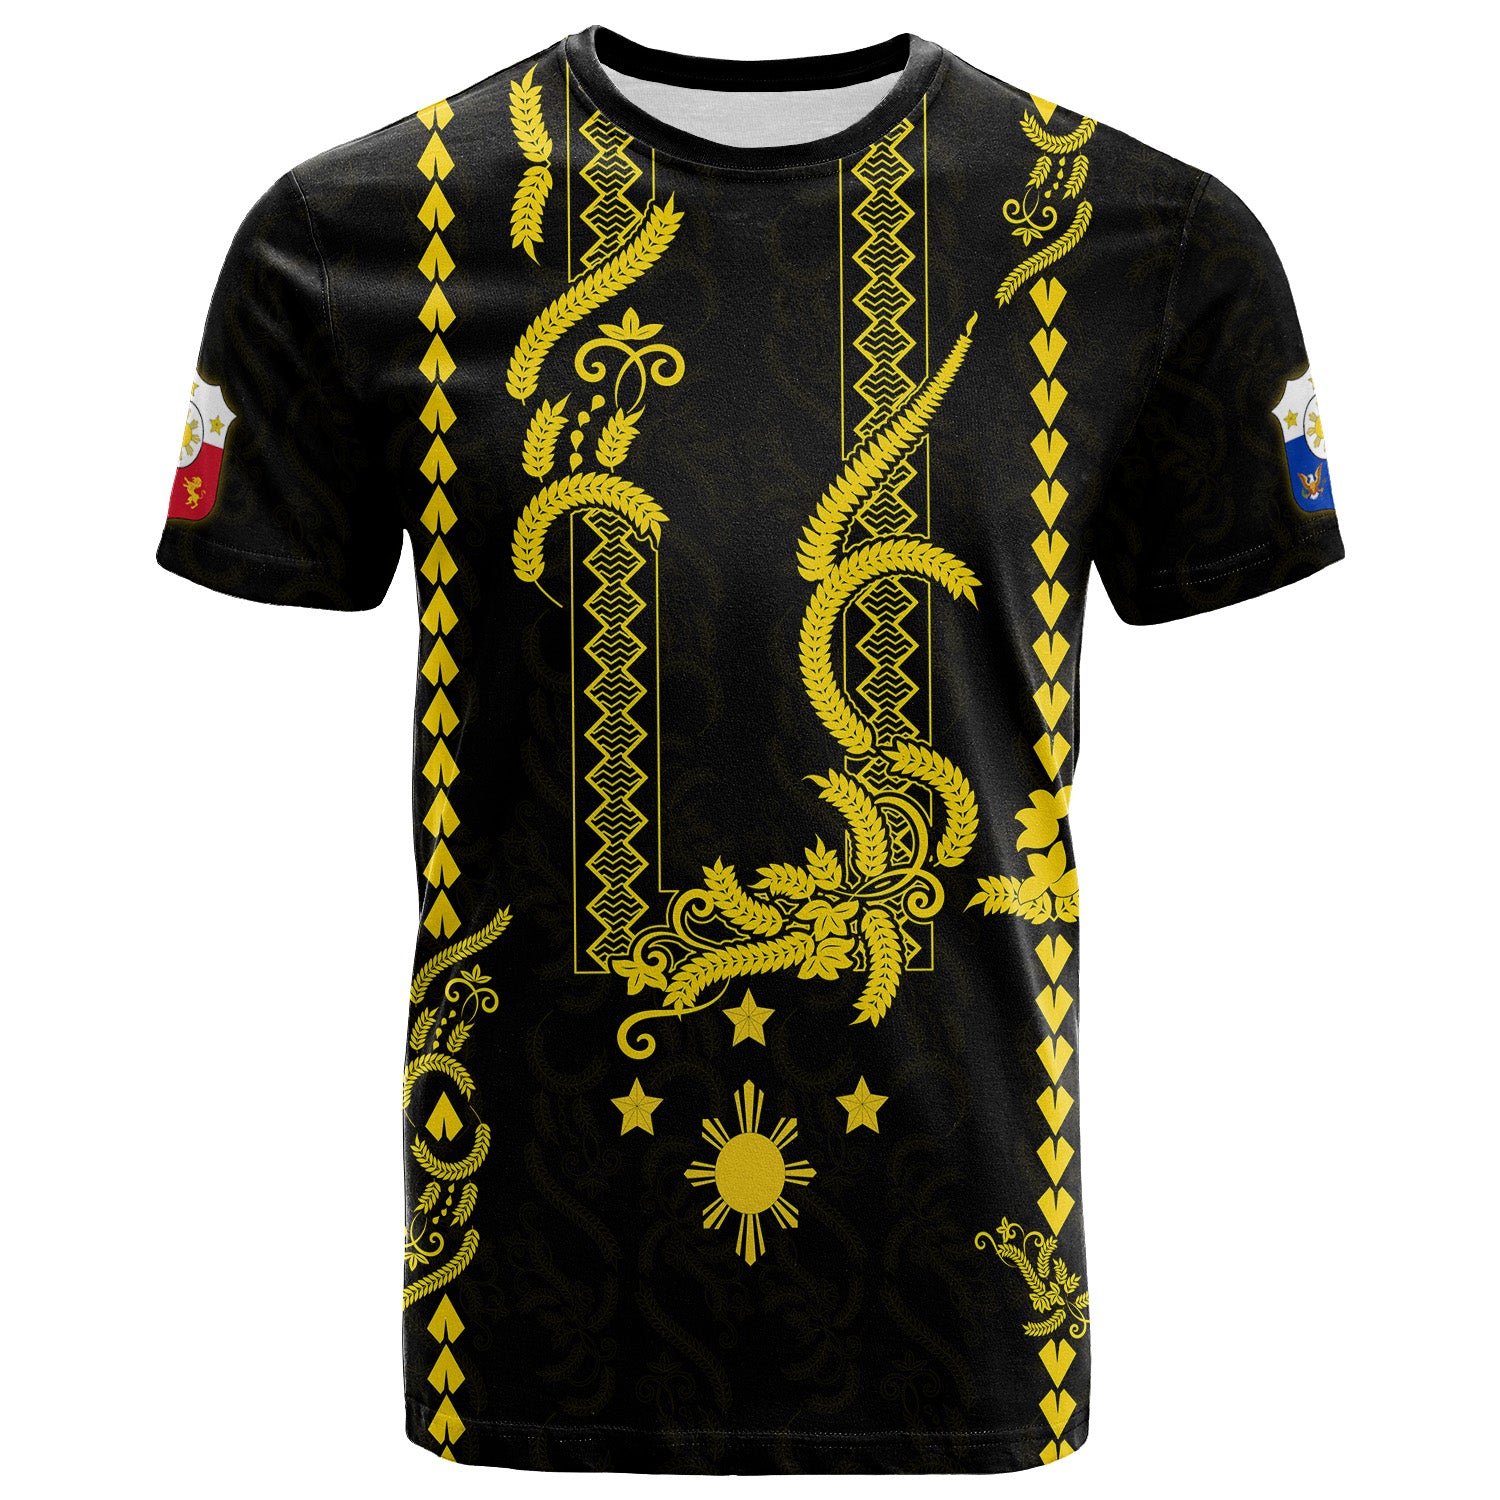 Philippines T Shirt Pechera With Side Barong Patterns LT9 Adult Black - Polynesian Pride